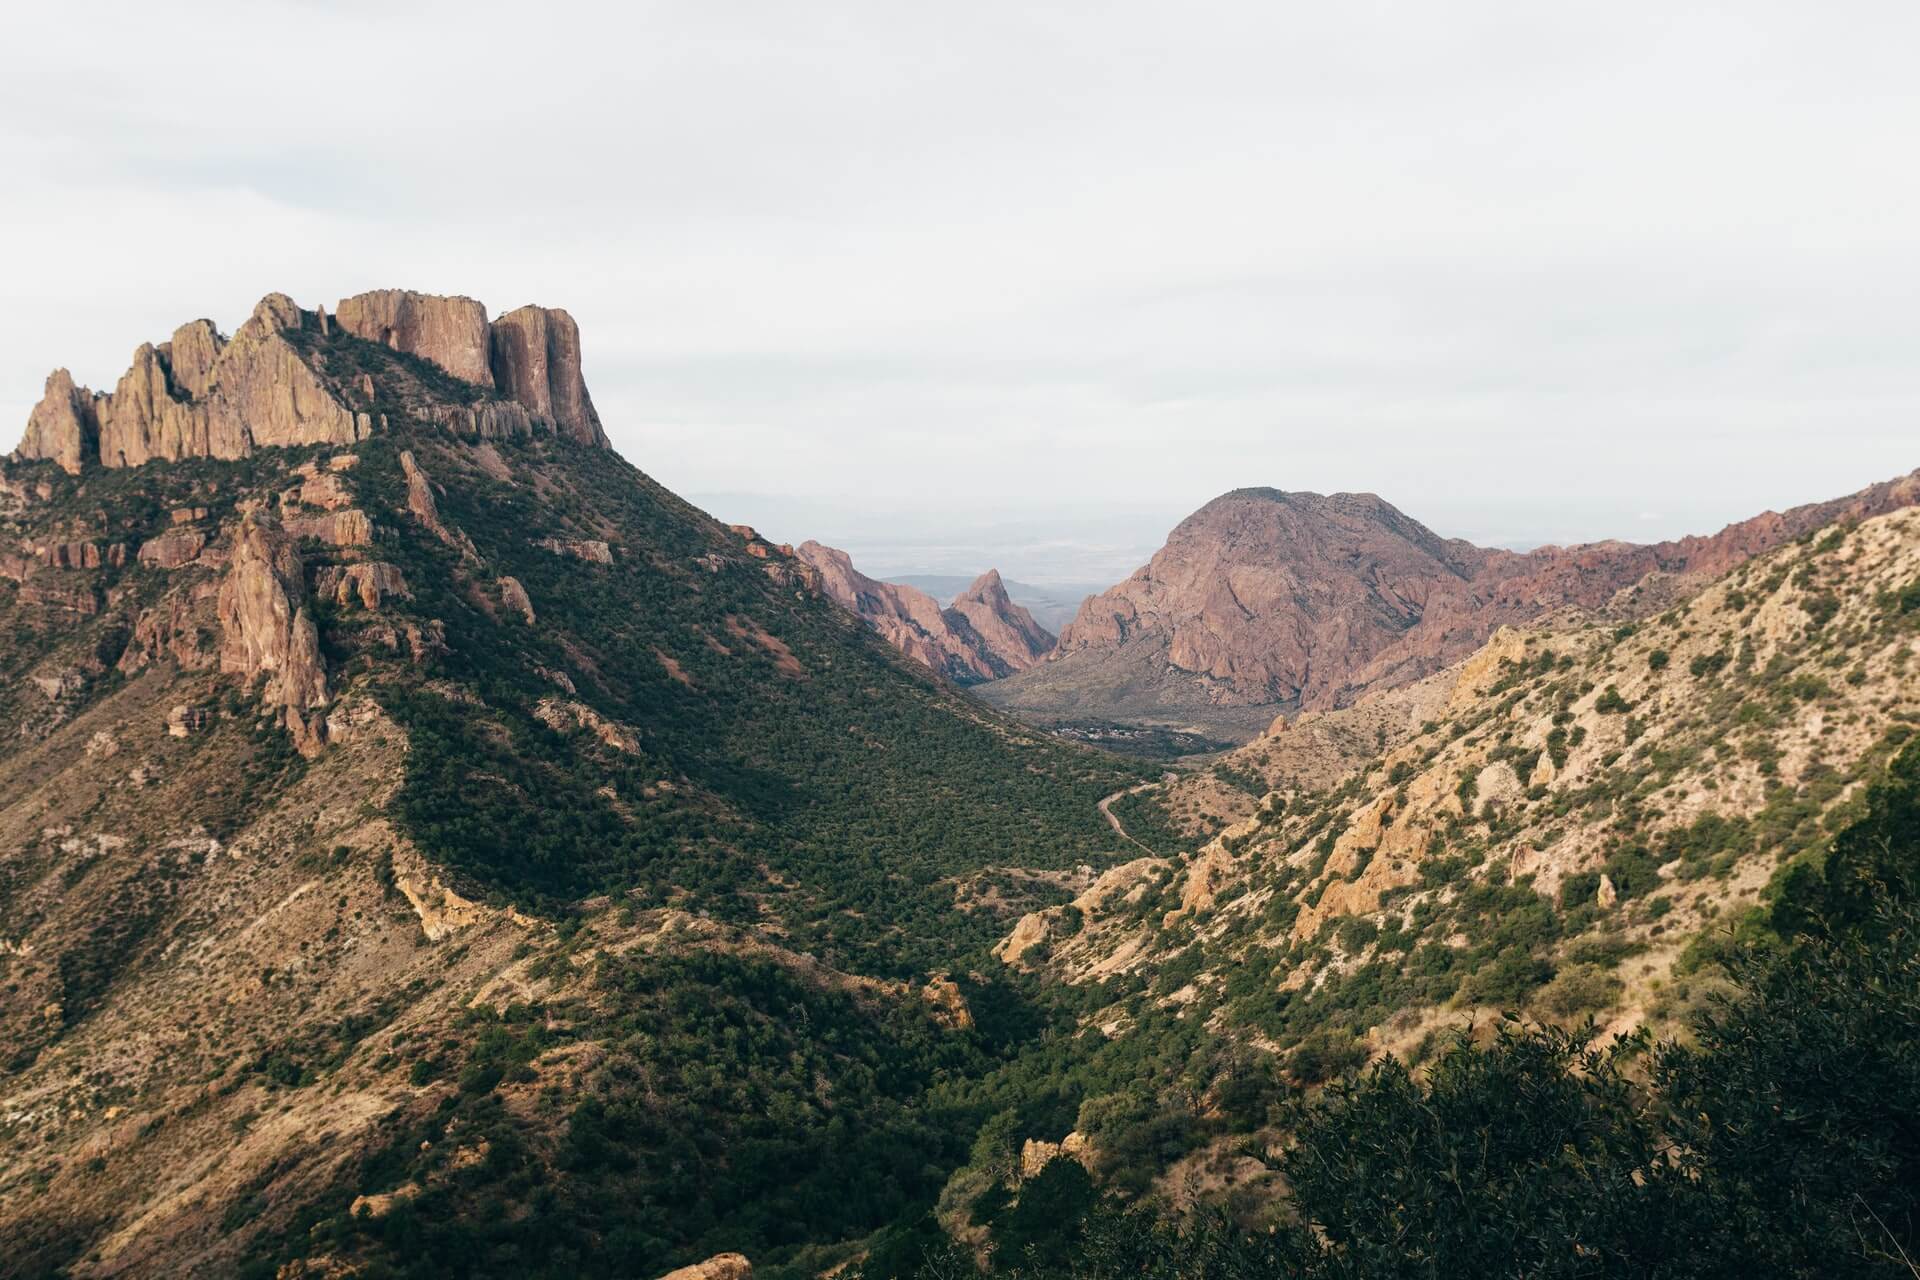 Scenic rugged mountains in the Big Bend